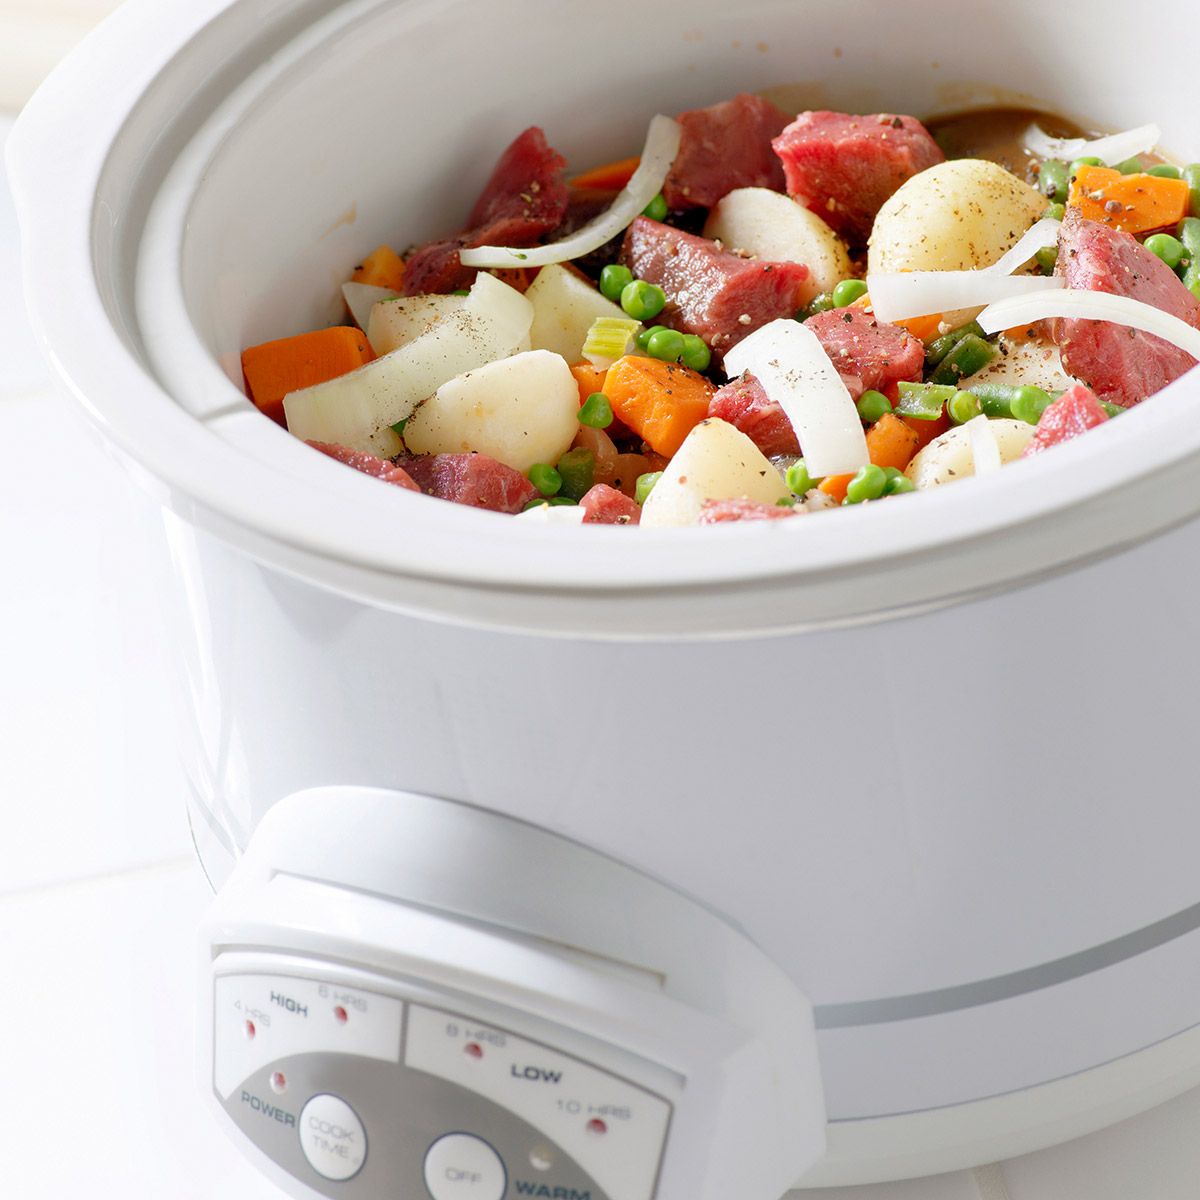 Slow cooker, pressure cooker and steam cooker buying guide - how